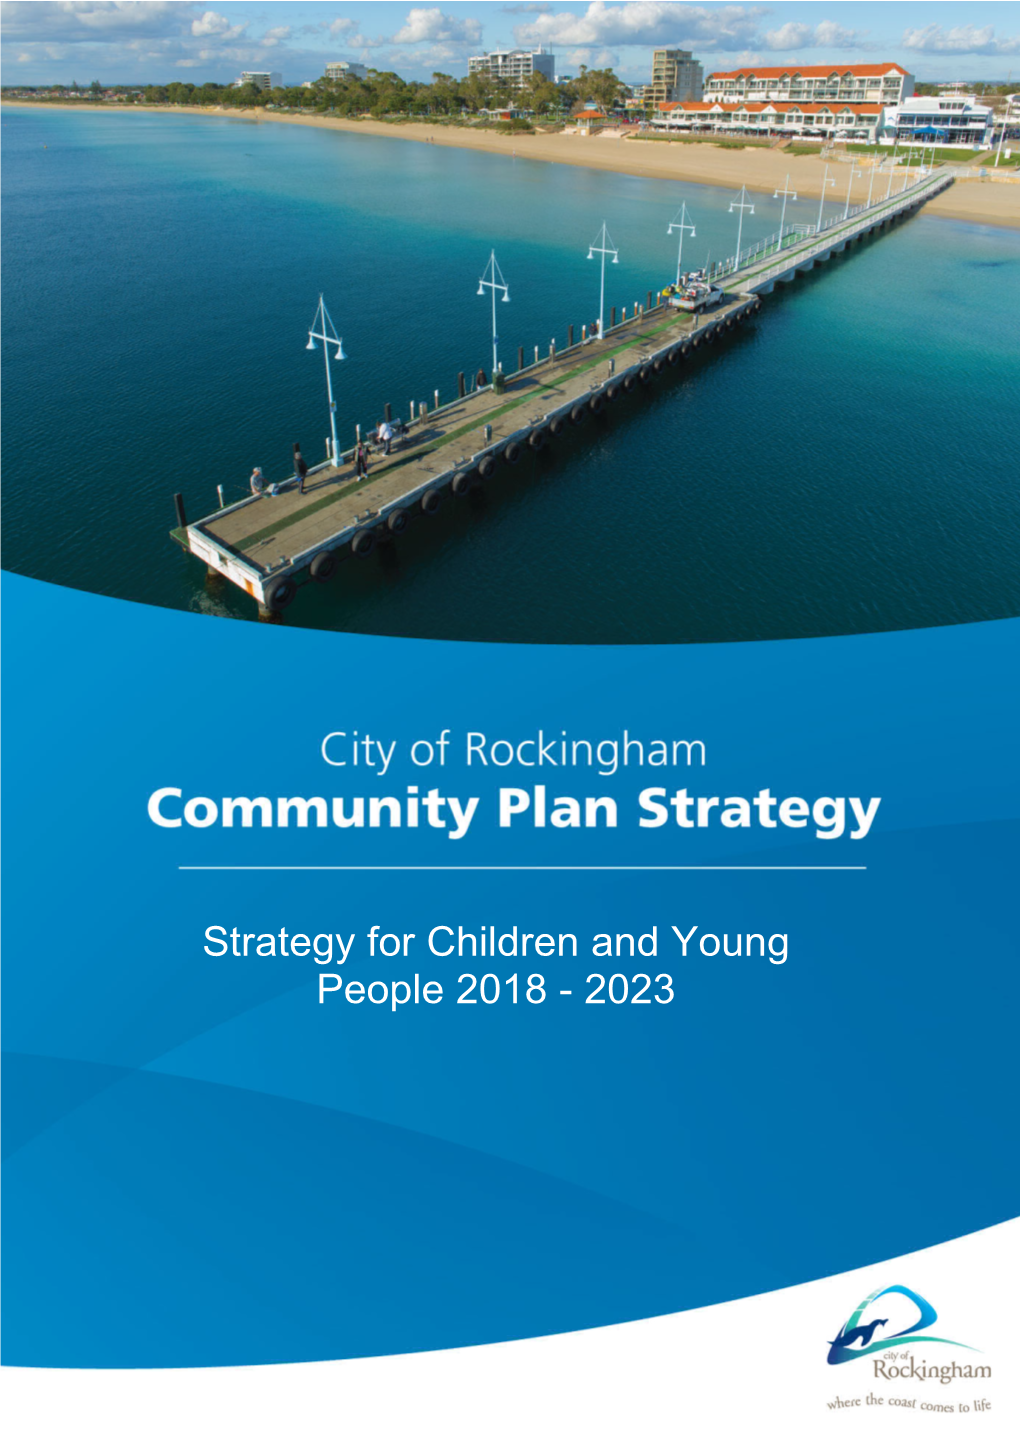 Strategy for Children and Young People 2018 - 2023